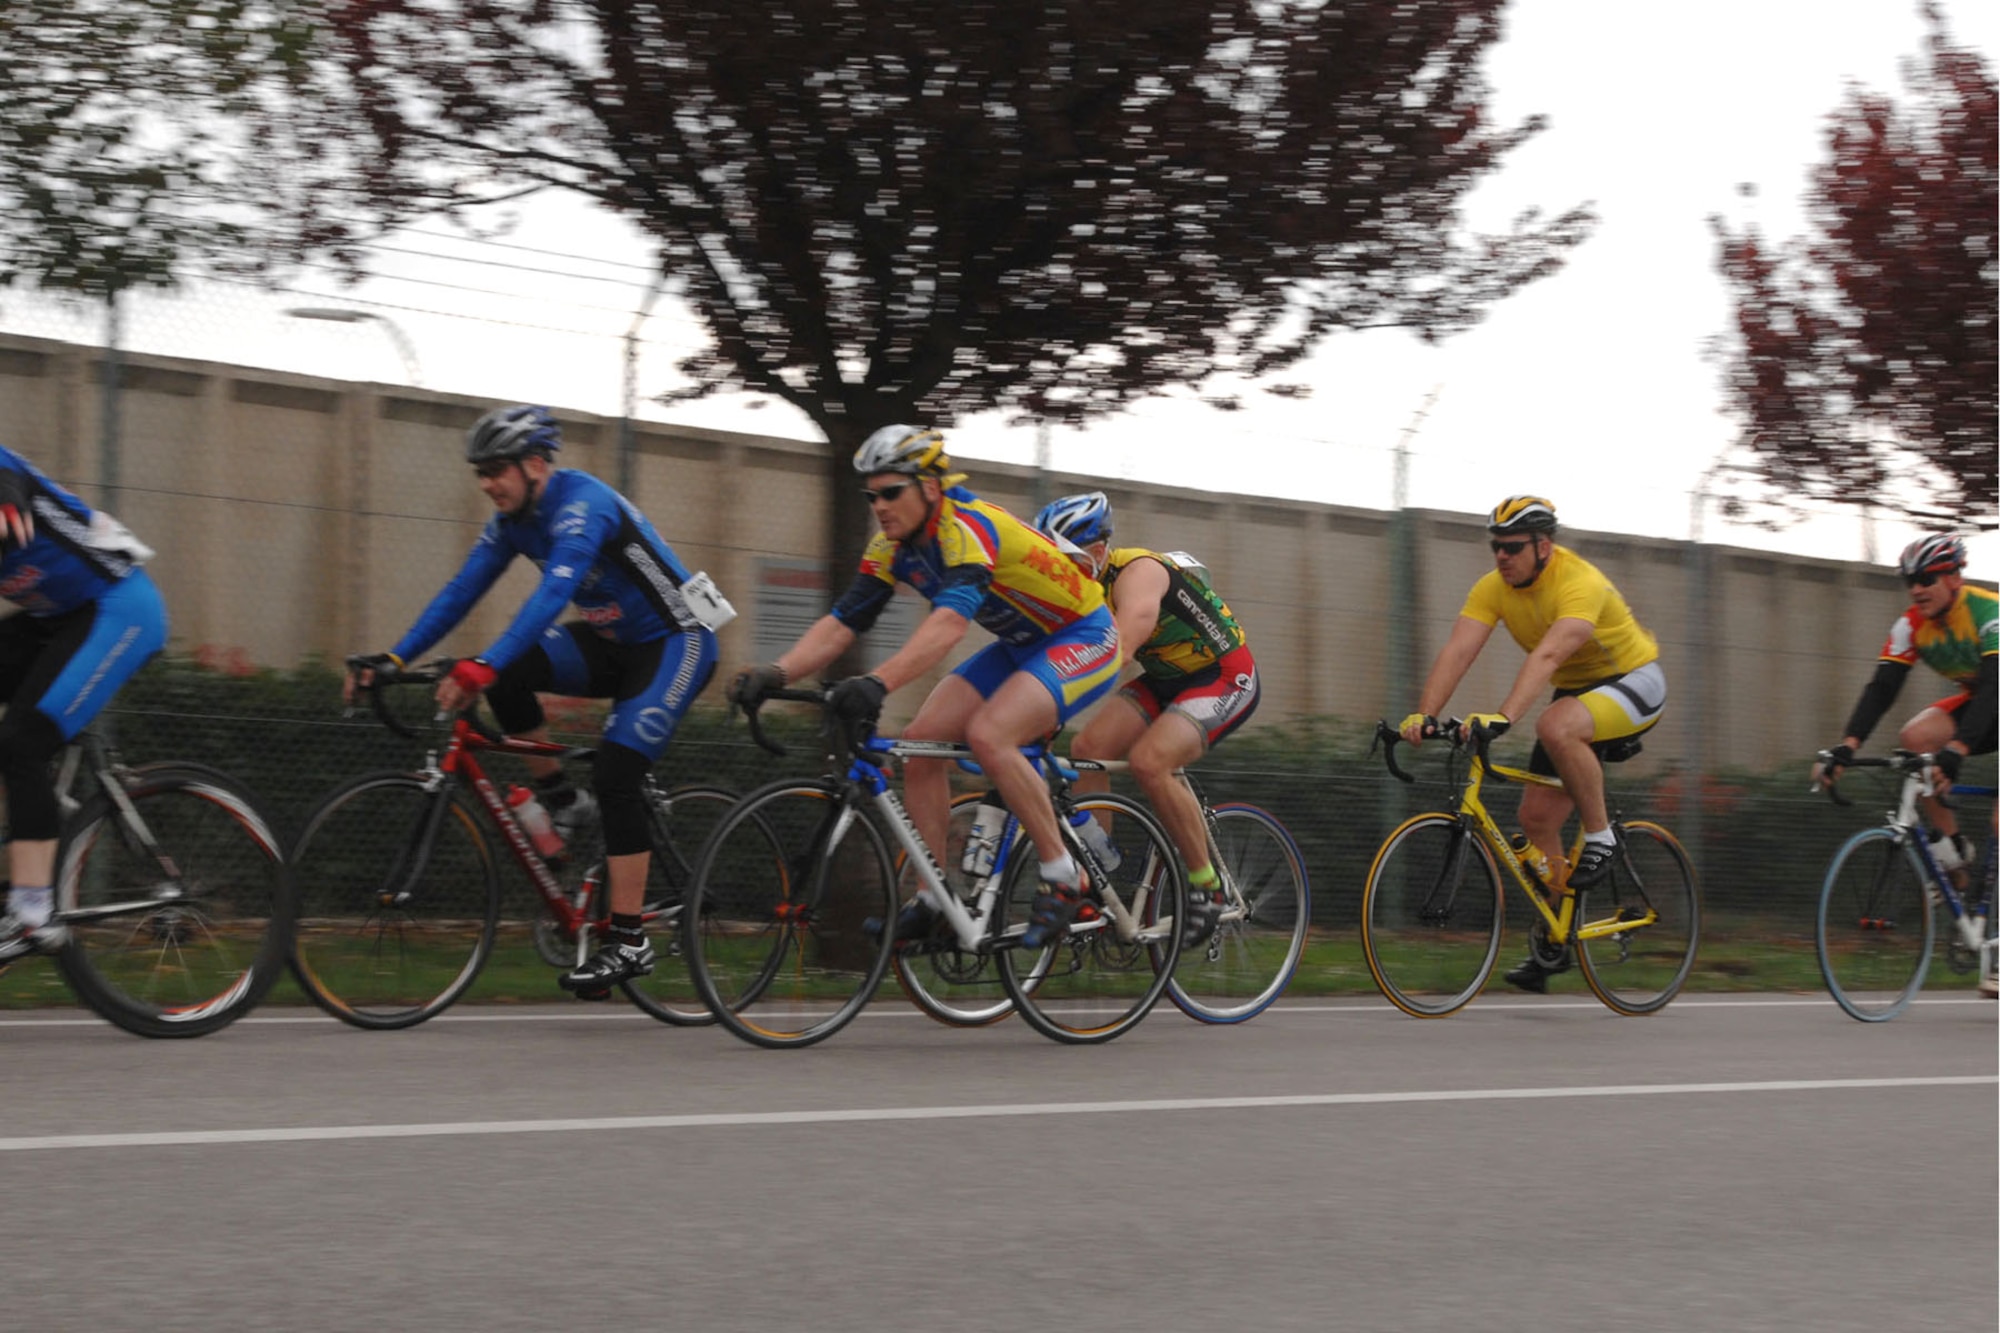 The lead group of riders in the men's 53 kilometer race held here April 19 take turns drafting off of each other as they push through the 25 mph head wind on the back-half of the course.  Christopher Fritzsche, center, wearing a blue/yellow jersey, from the 31st Civil Engineer Squadron, finished first with a time of 1:29.14 averaging 35.6 kilometers per hour.  The race is part of the 2009 U.S. Forces Europe Road Cycling Series.  (U.S. Air Force photo/Tech. Sgt. Michael O'Connor)